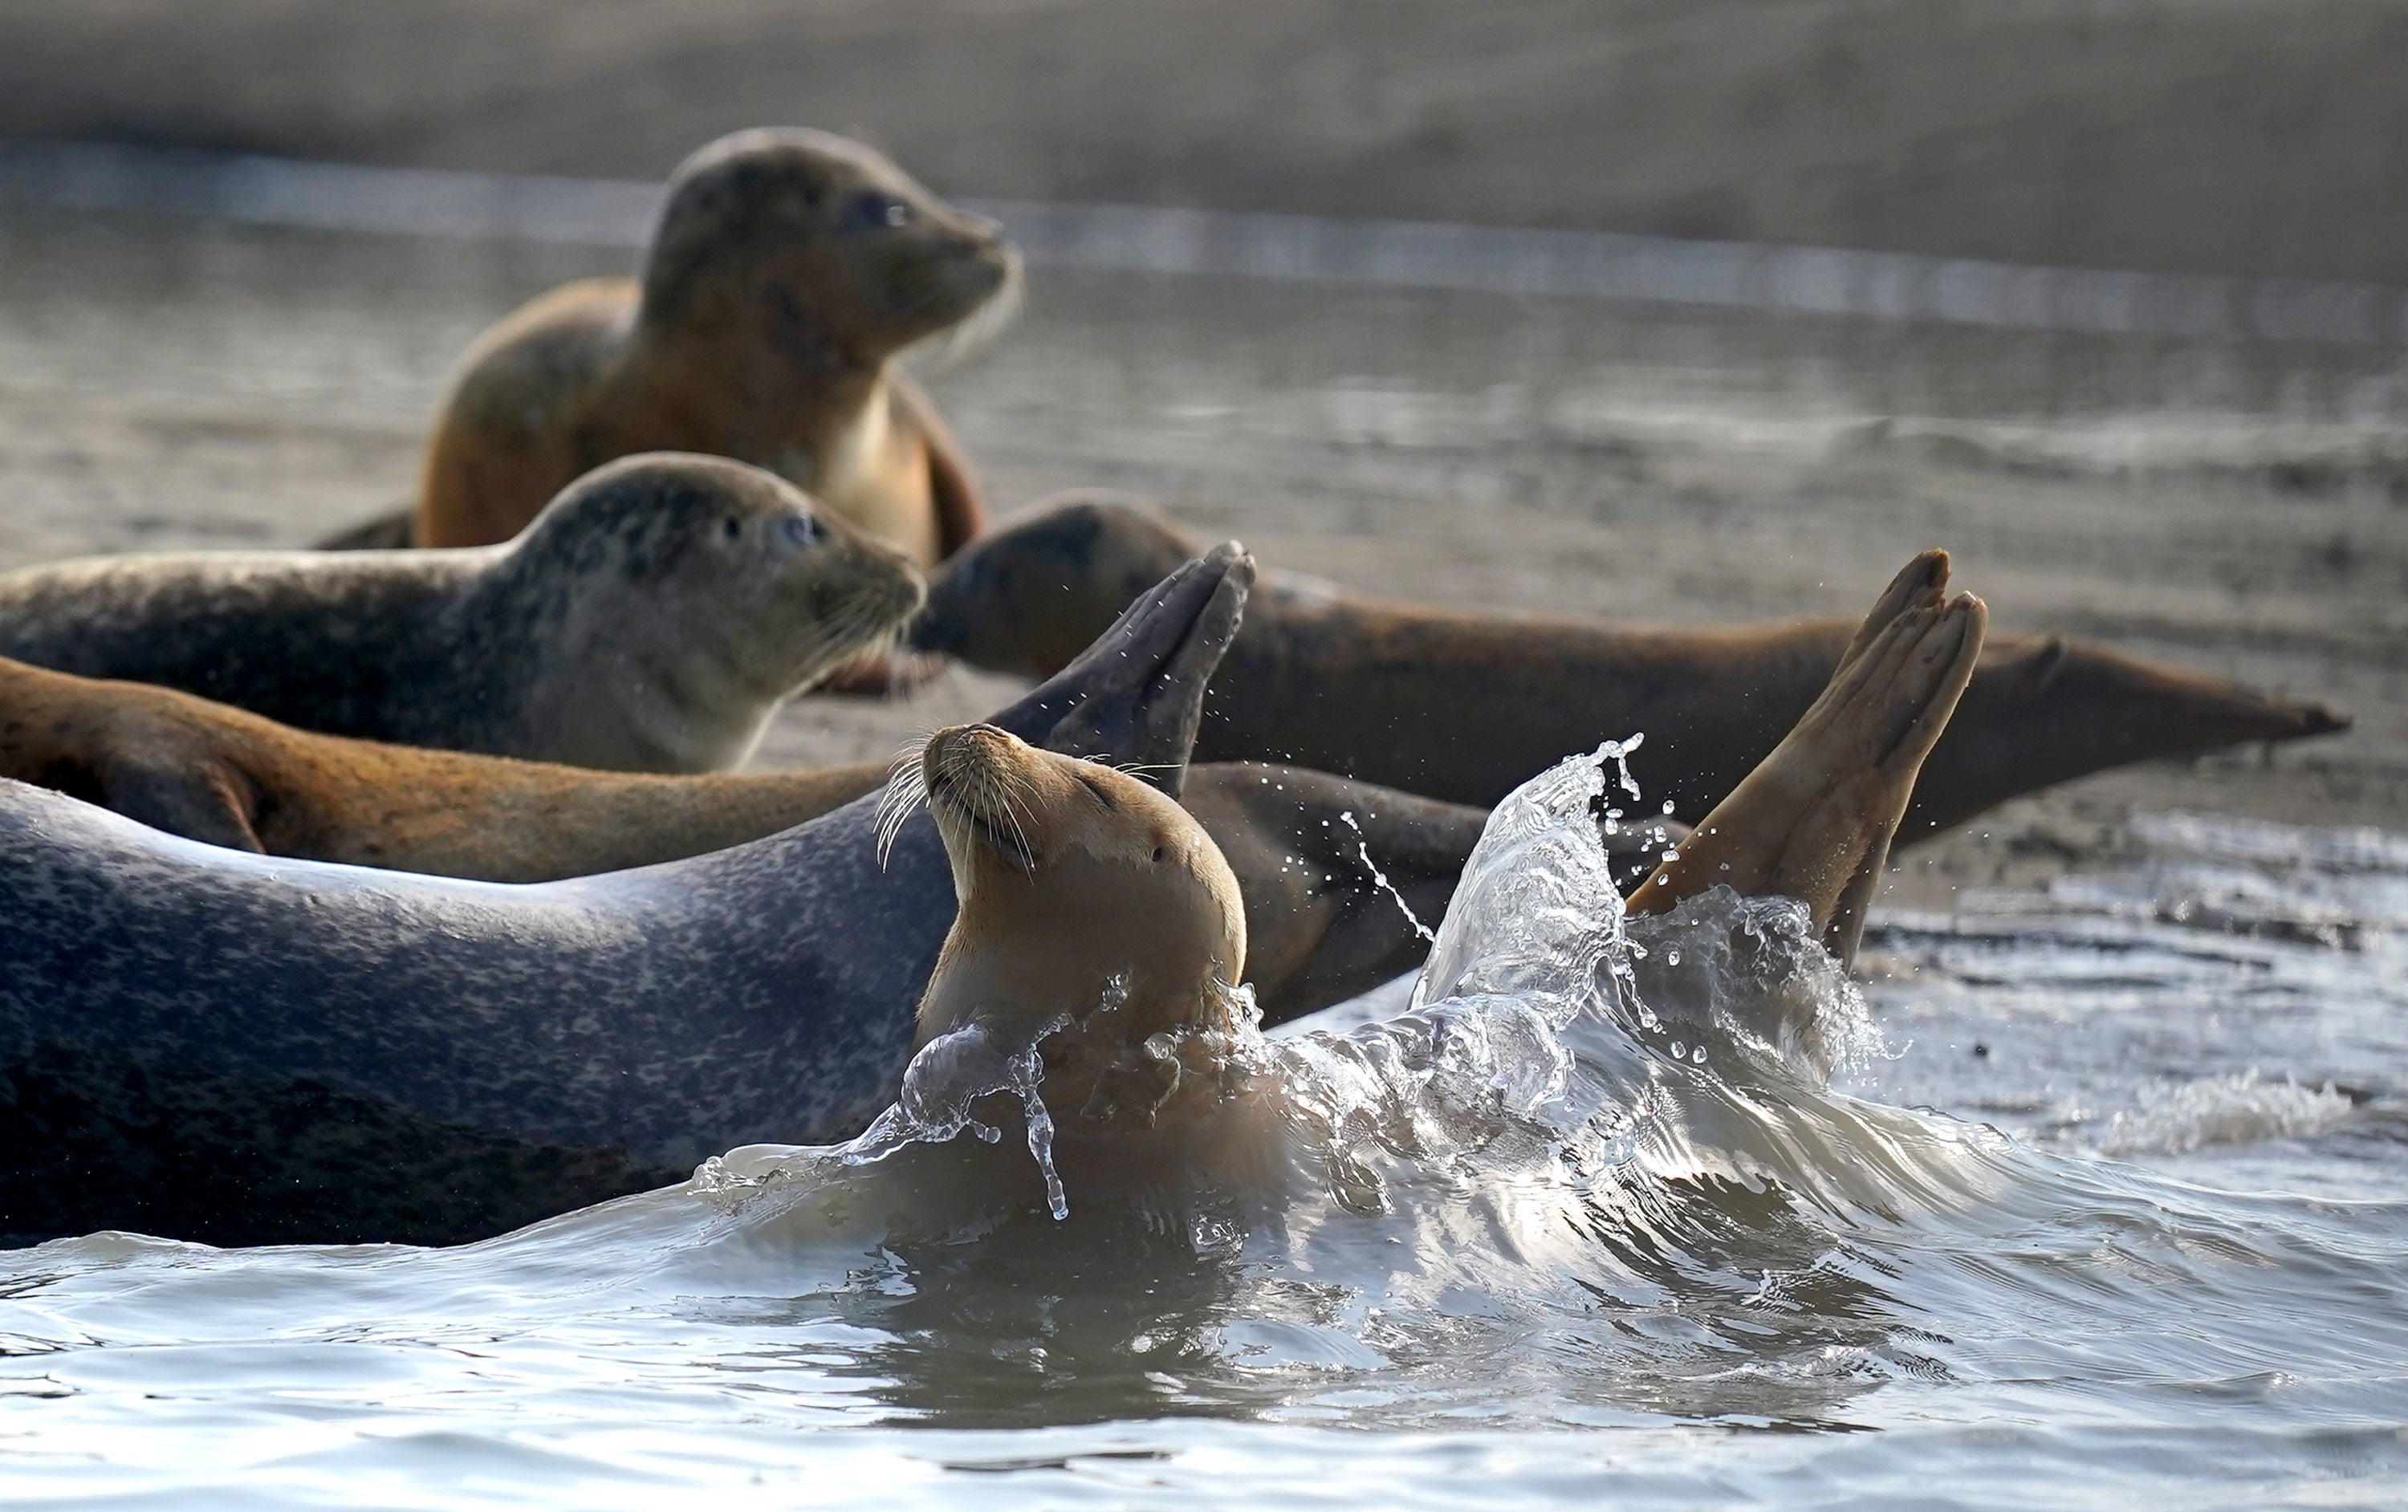 The Thames’ healthy seal population is proof the river is teeming with life, conservationists have said